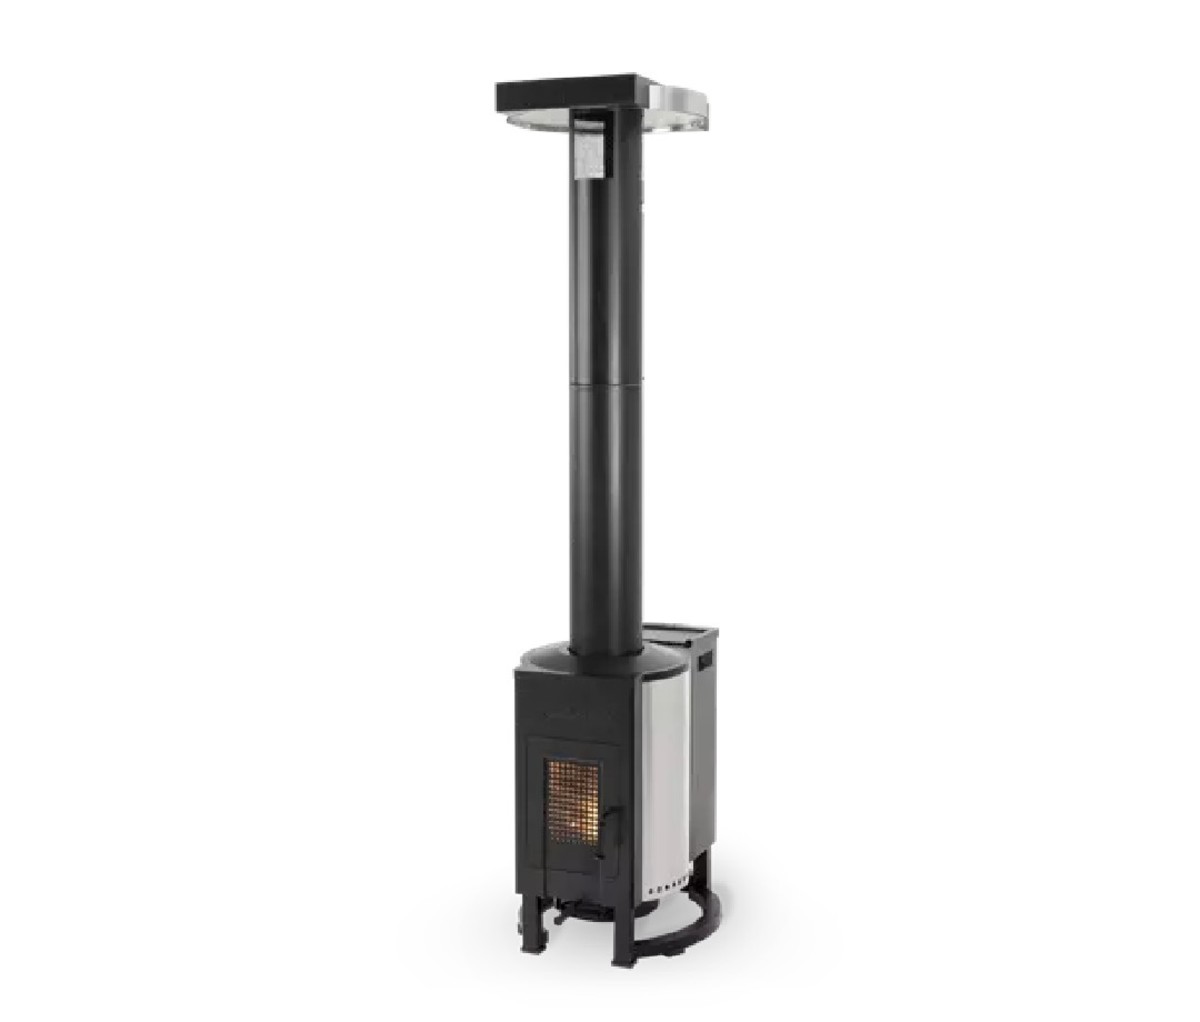 SoloStove Tower Patio Heater.